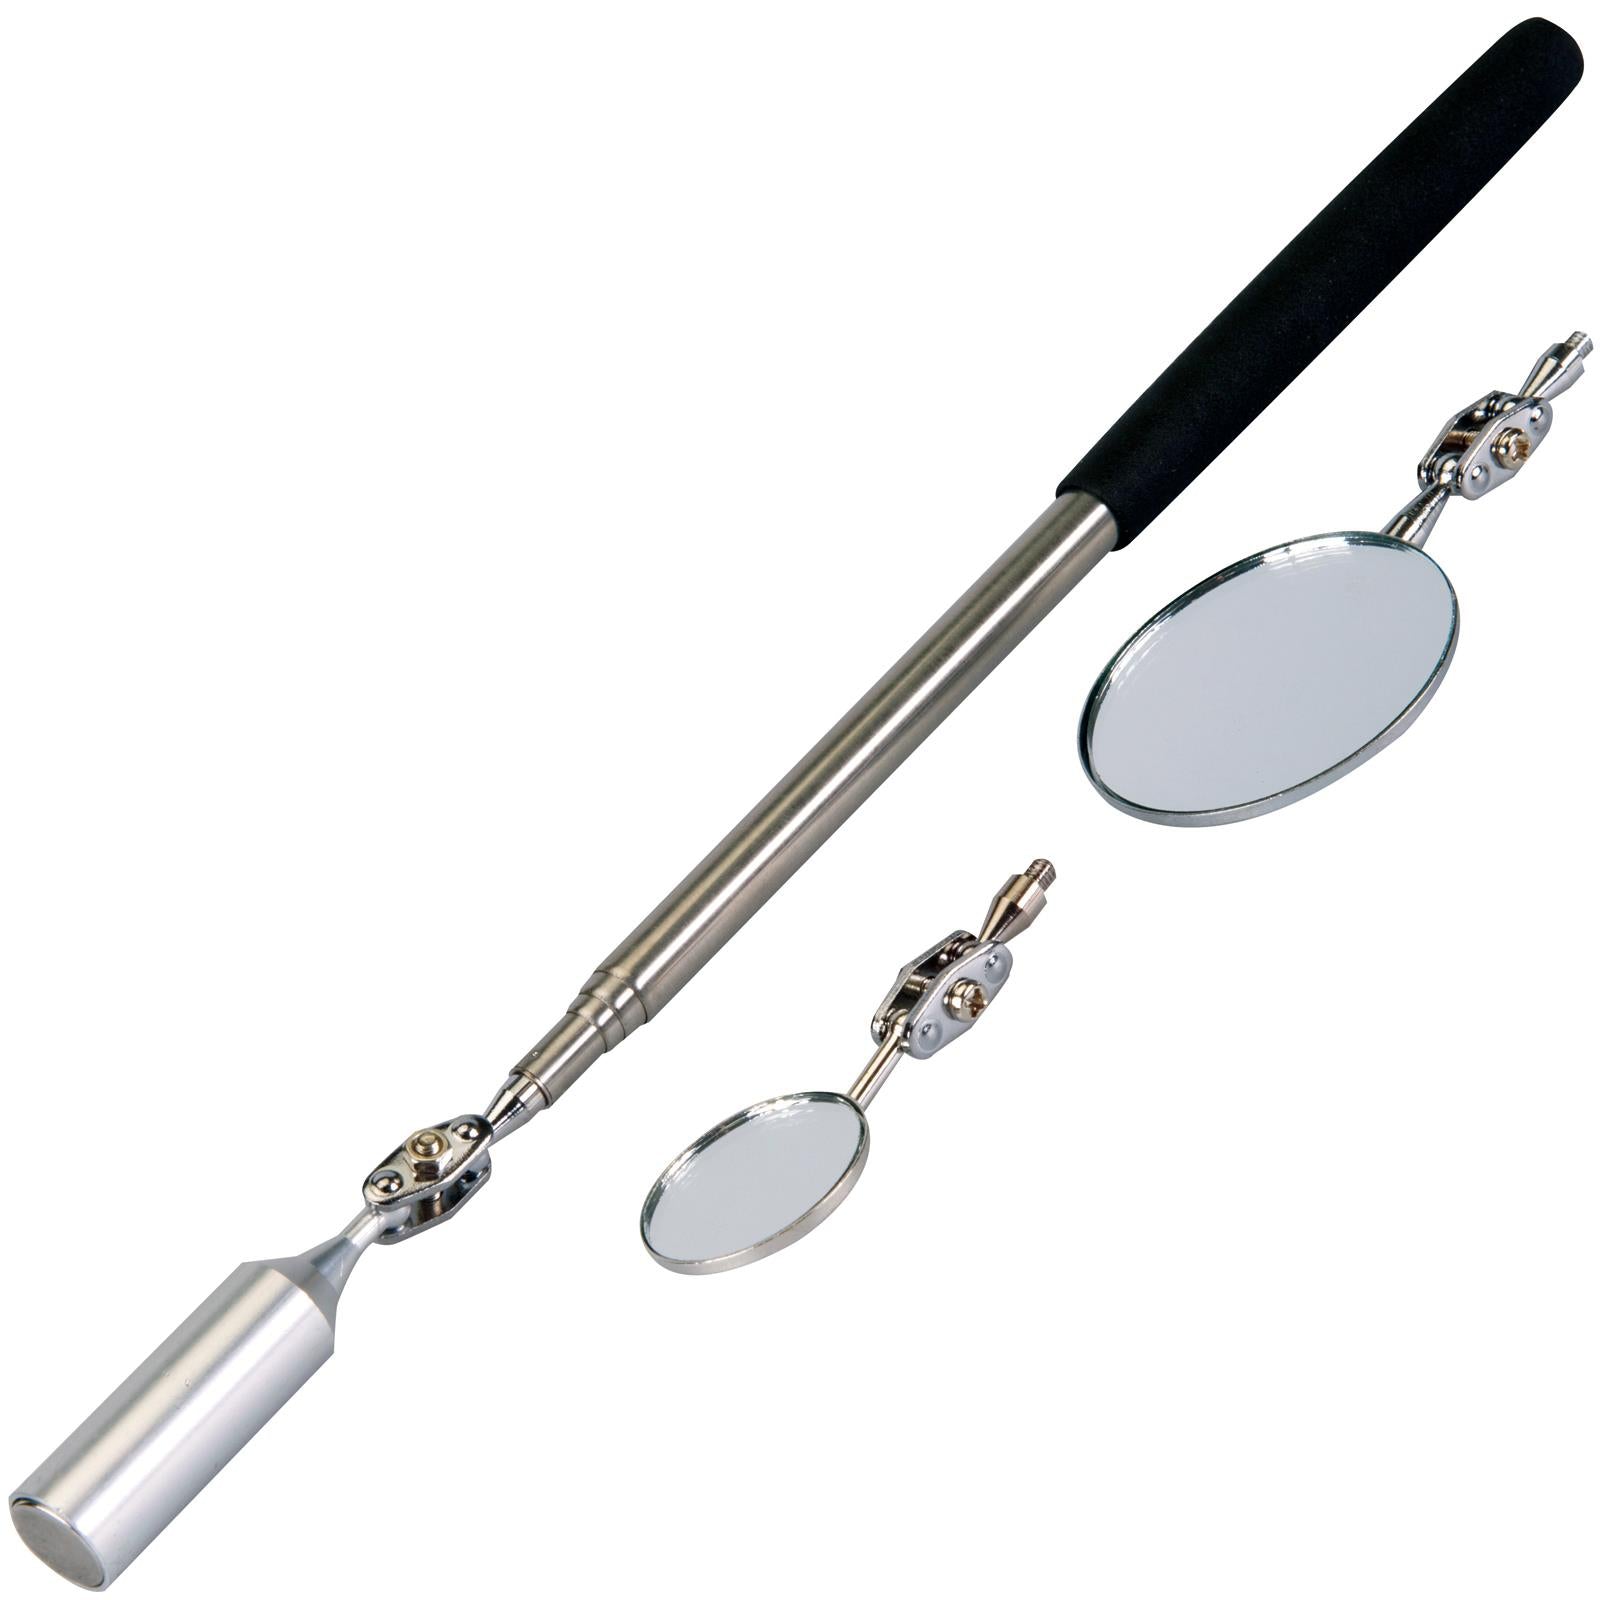 Silverline 800mm 3 in 1 Pick Up Tool InspectionTelescopic Mirror